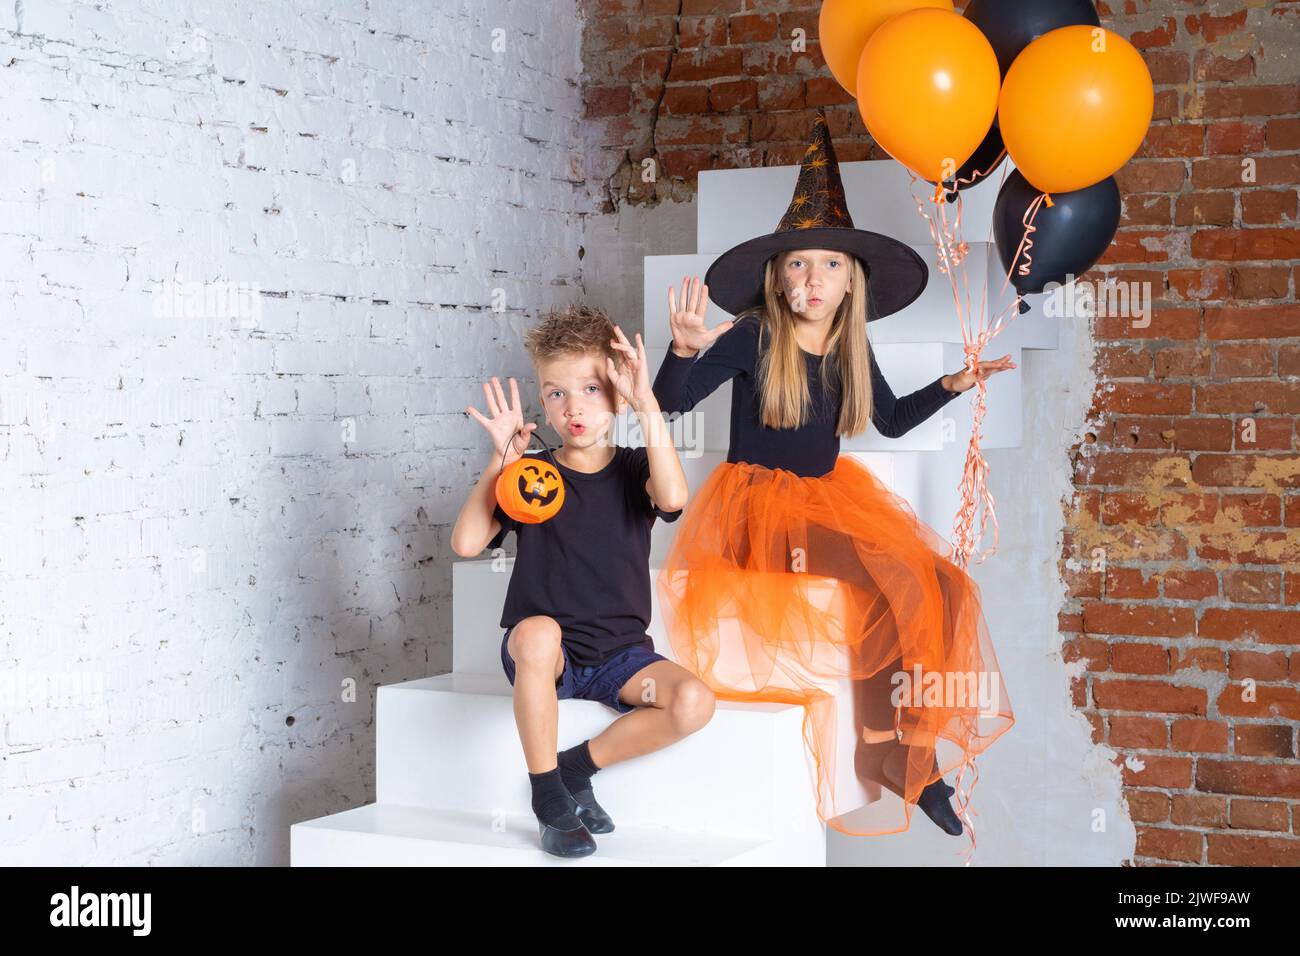 Kids on Halloween. A little girl and a boy in witch and sorcerer costumes with hats holding orange and black balls and making frightening gestures wit Stock Photo